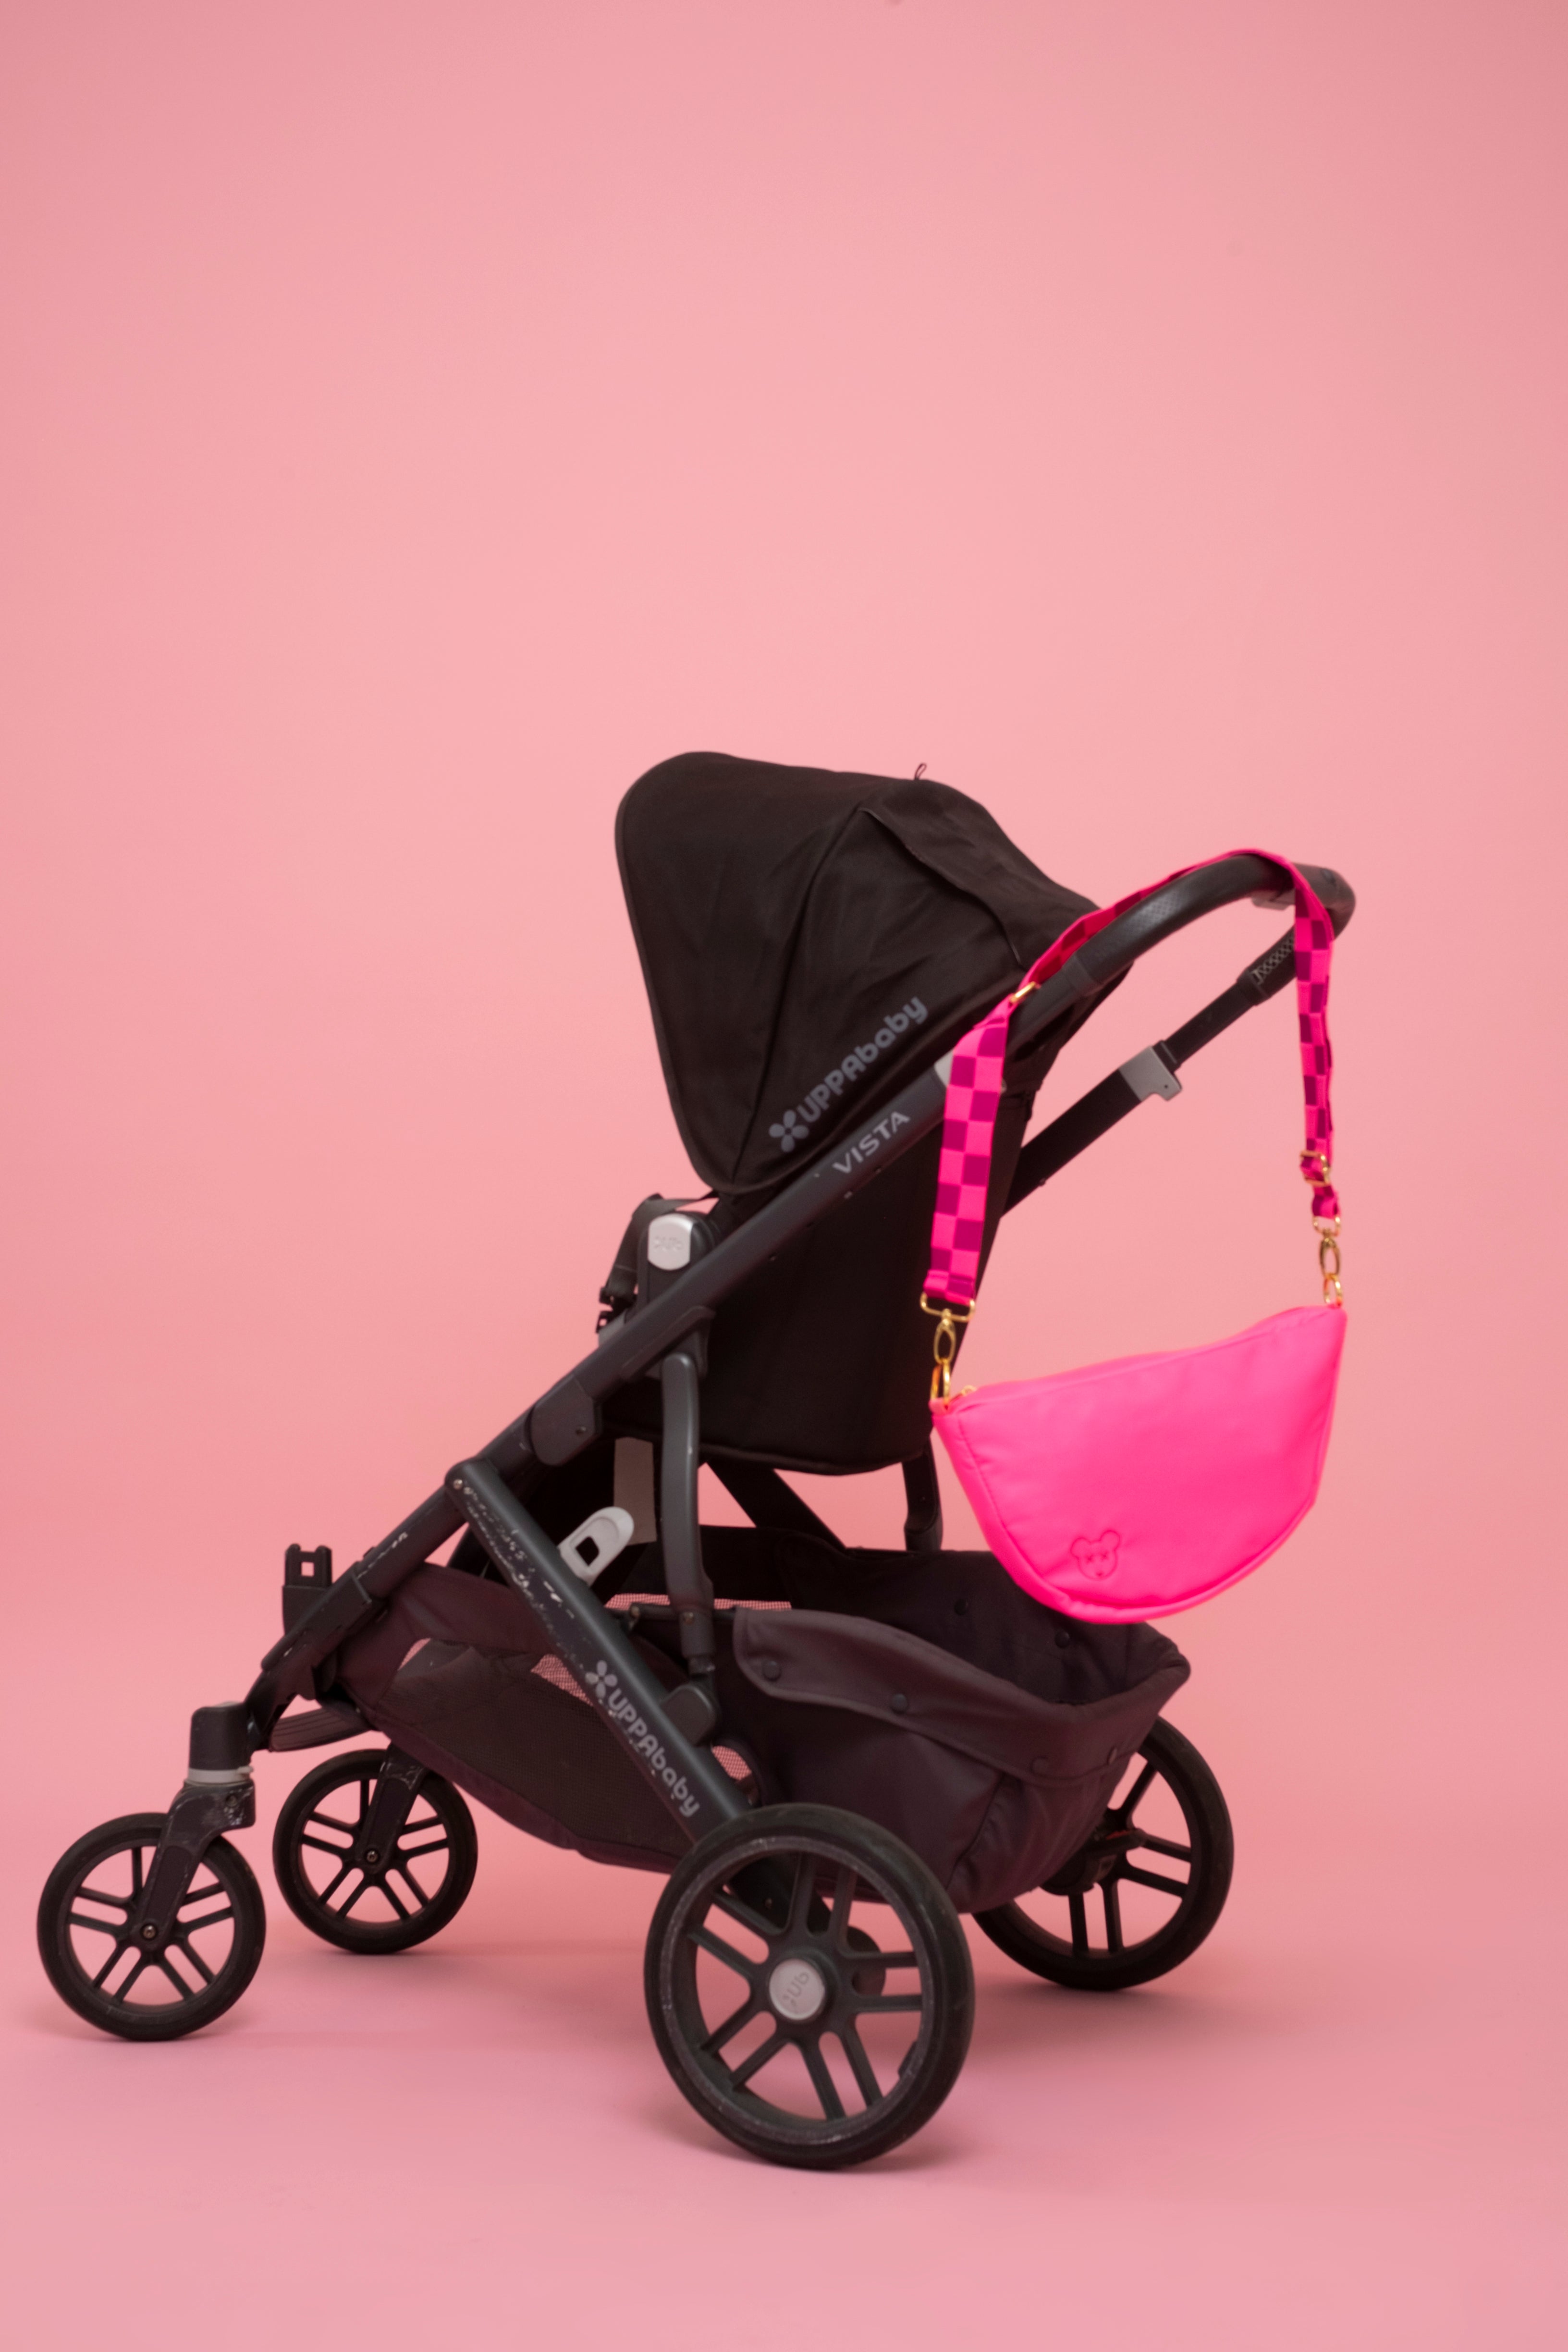 LIMITED DROP citimini sling - HOT PINK